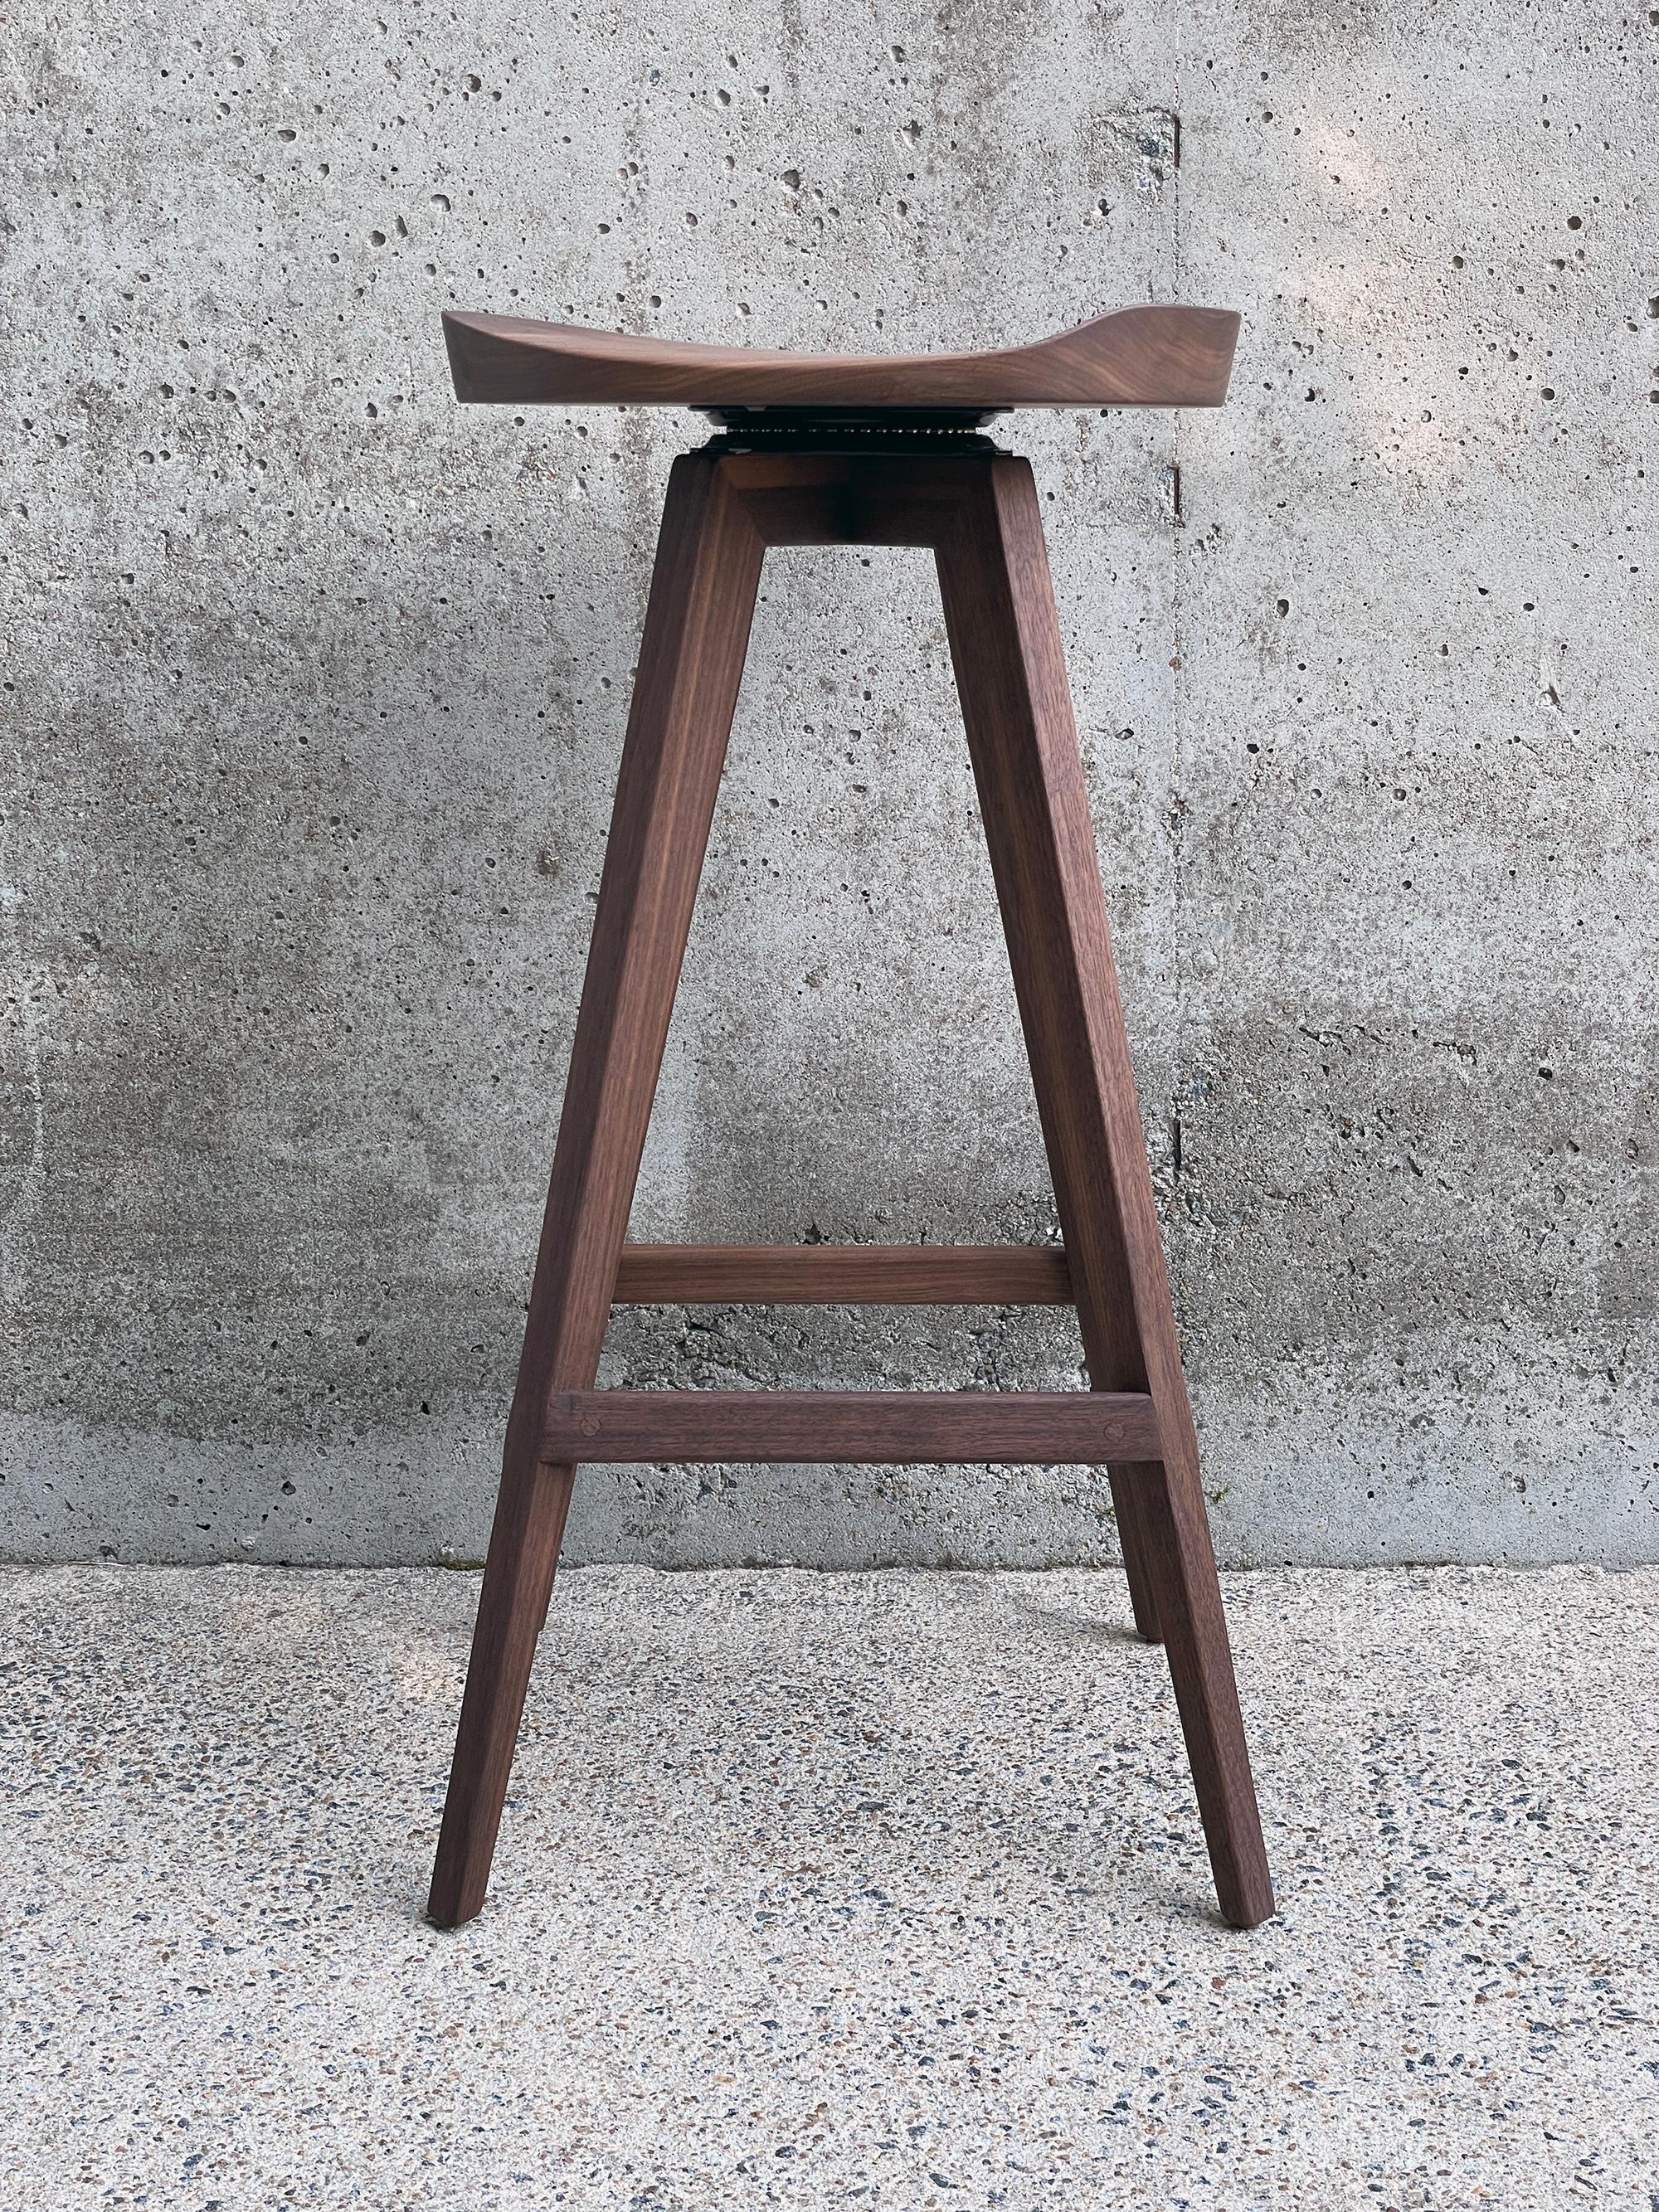 American Mid-Century Modern Sculpted Swiveling Tractor Seat Stool For Sale